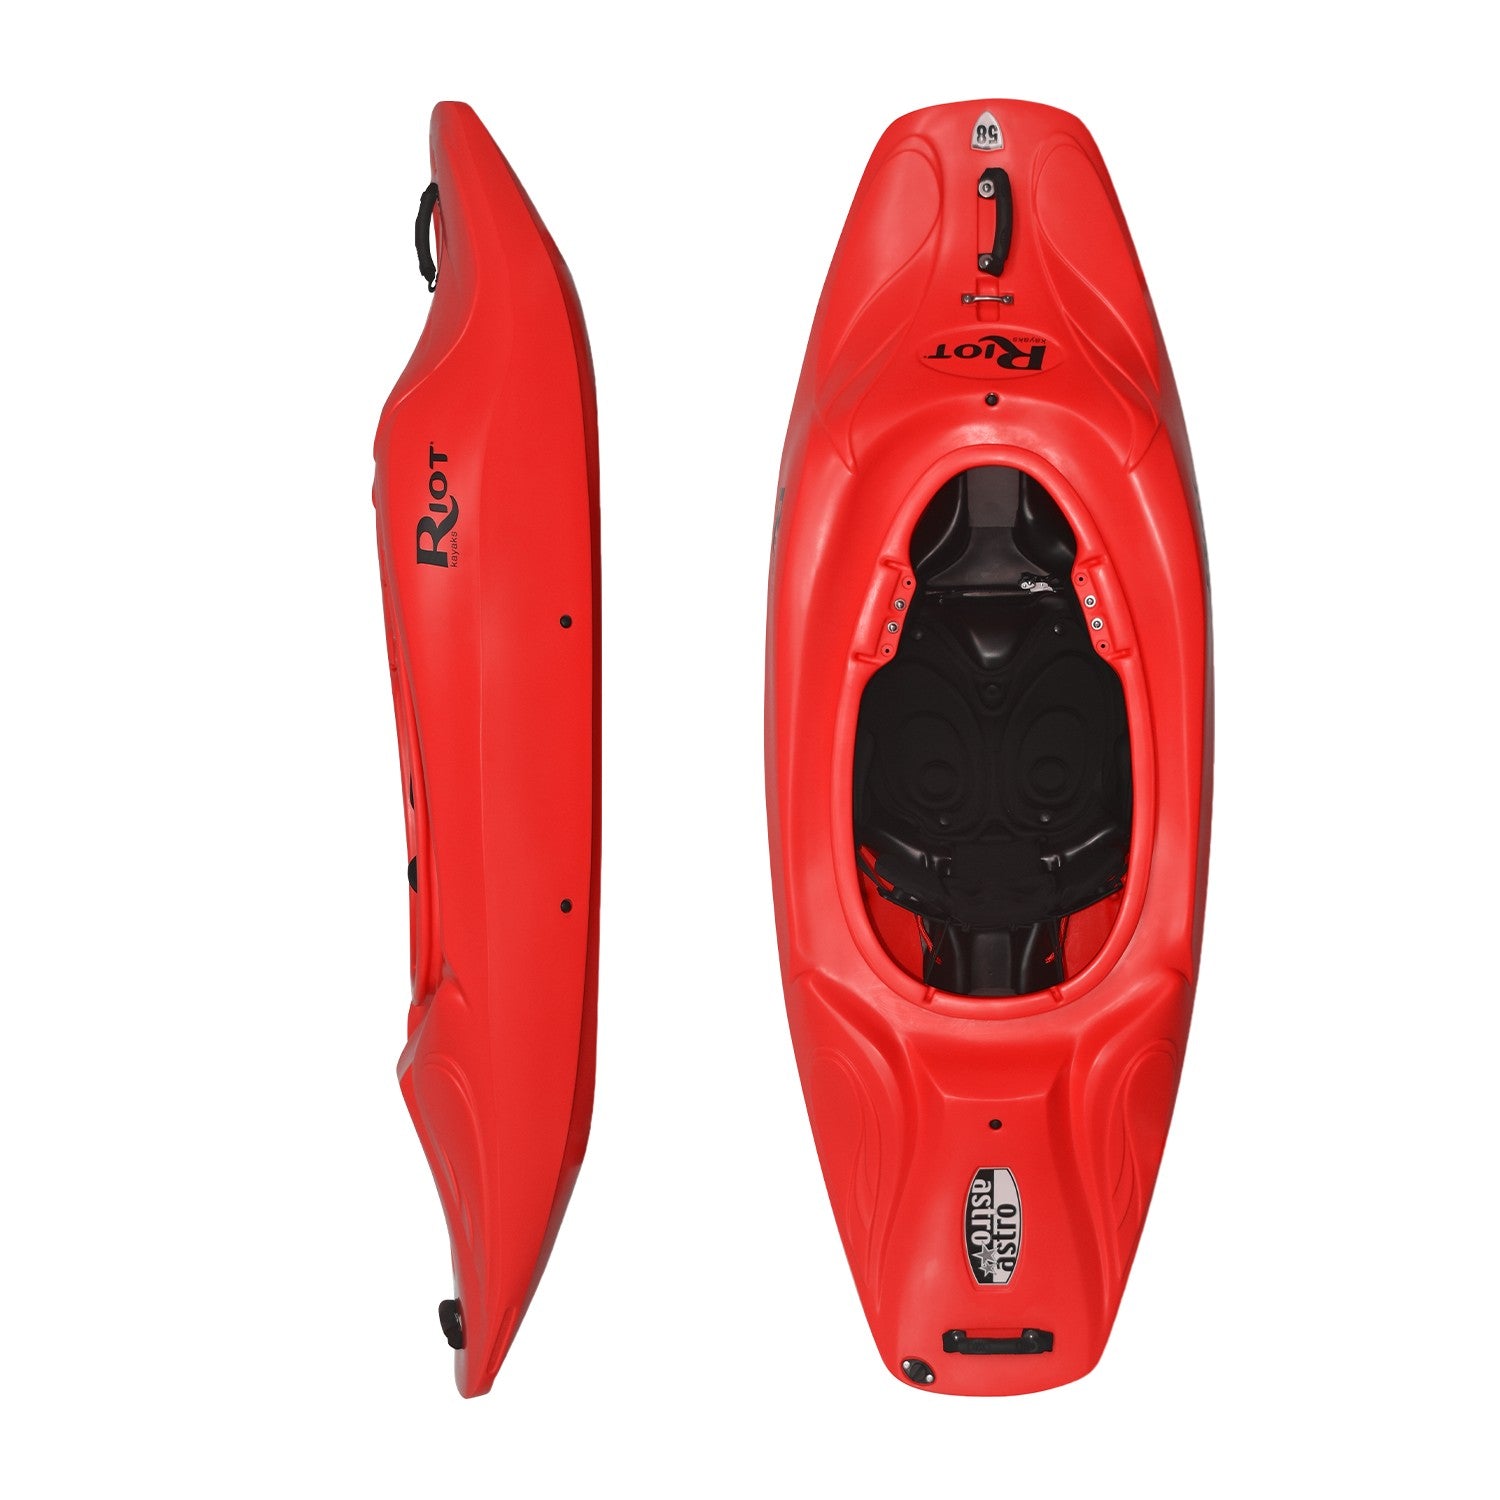 Astro 58 Kayak Top and Side View